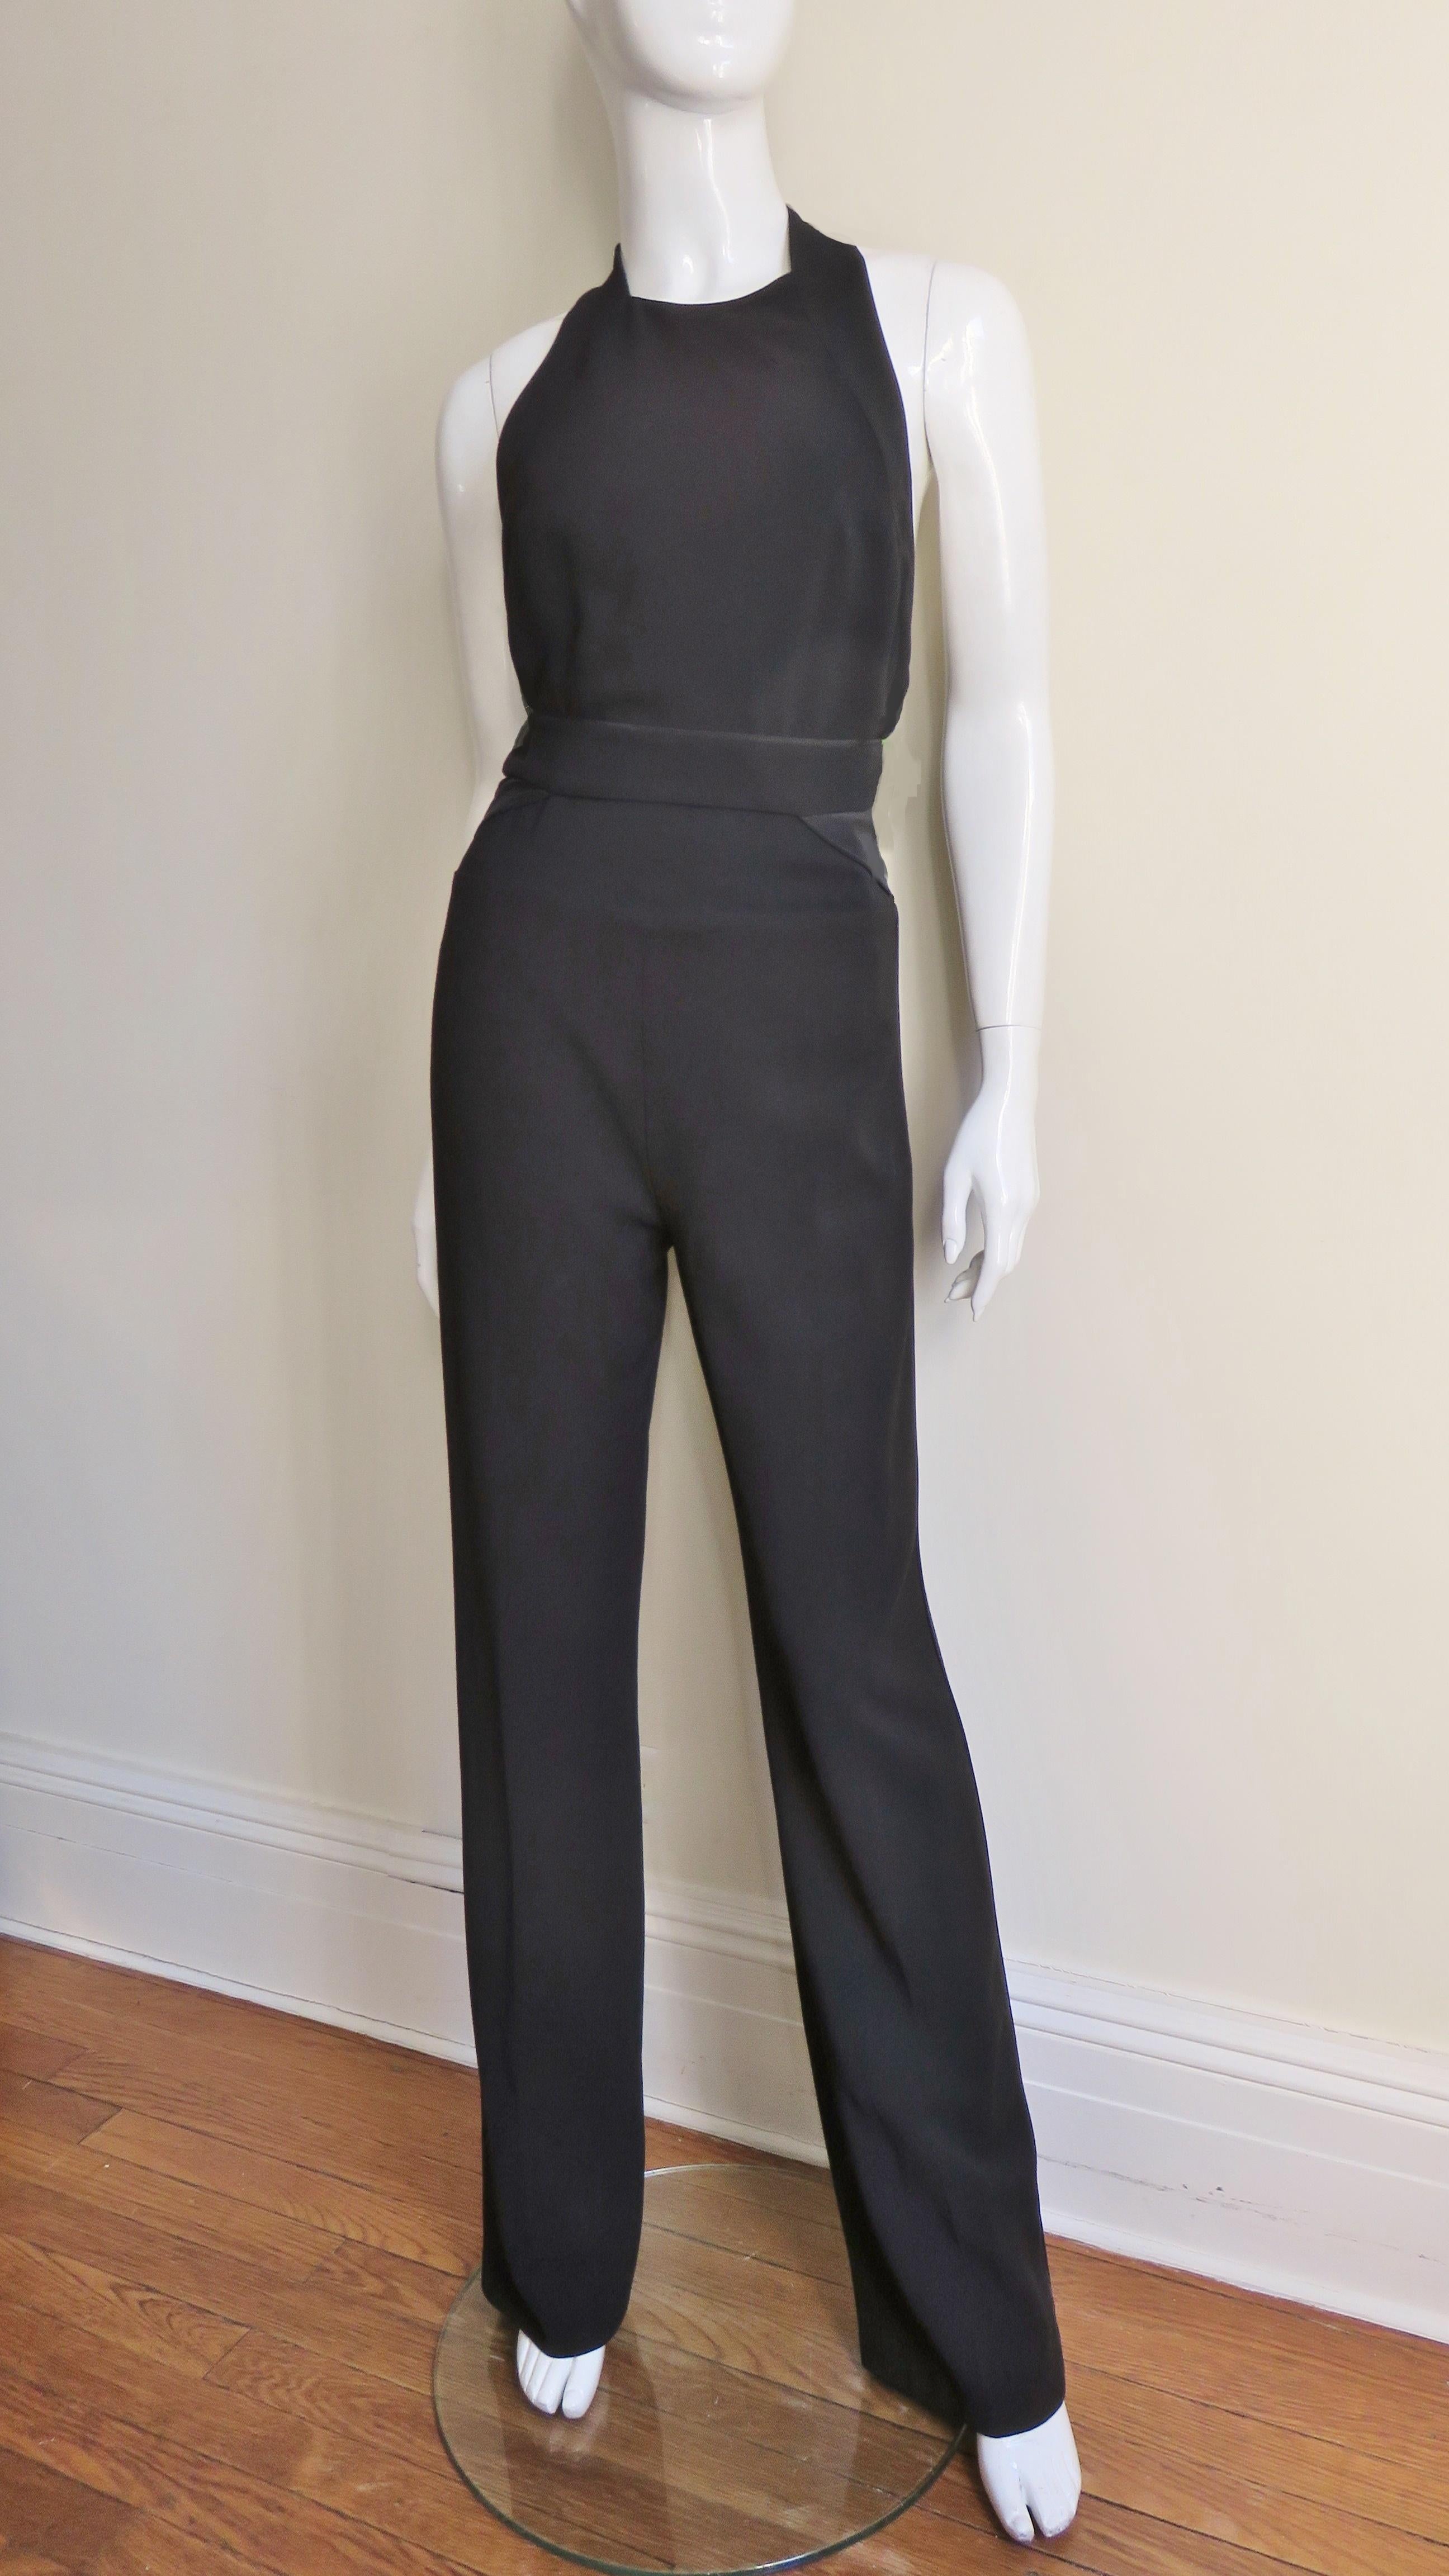 A fabulous black jumpsuit from Stella McCartney.  It has a crew neck, cut in shoulders, racerback and a band at the waist. The legs are straight and have matching piping along the outside of each leg.  It has a back zipper and is lined in black